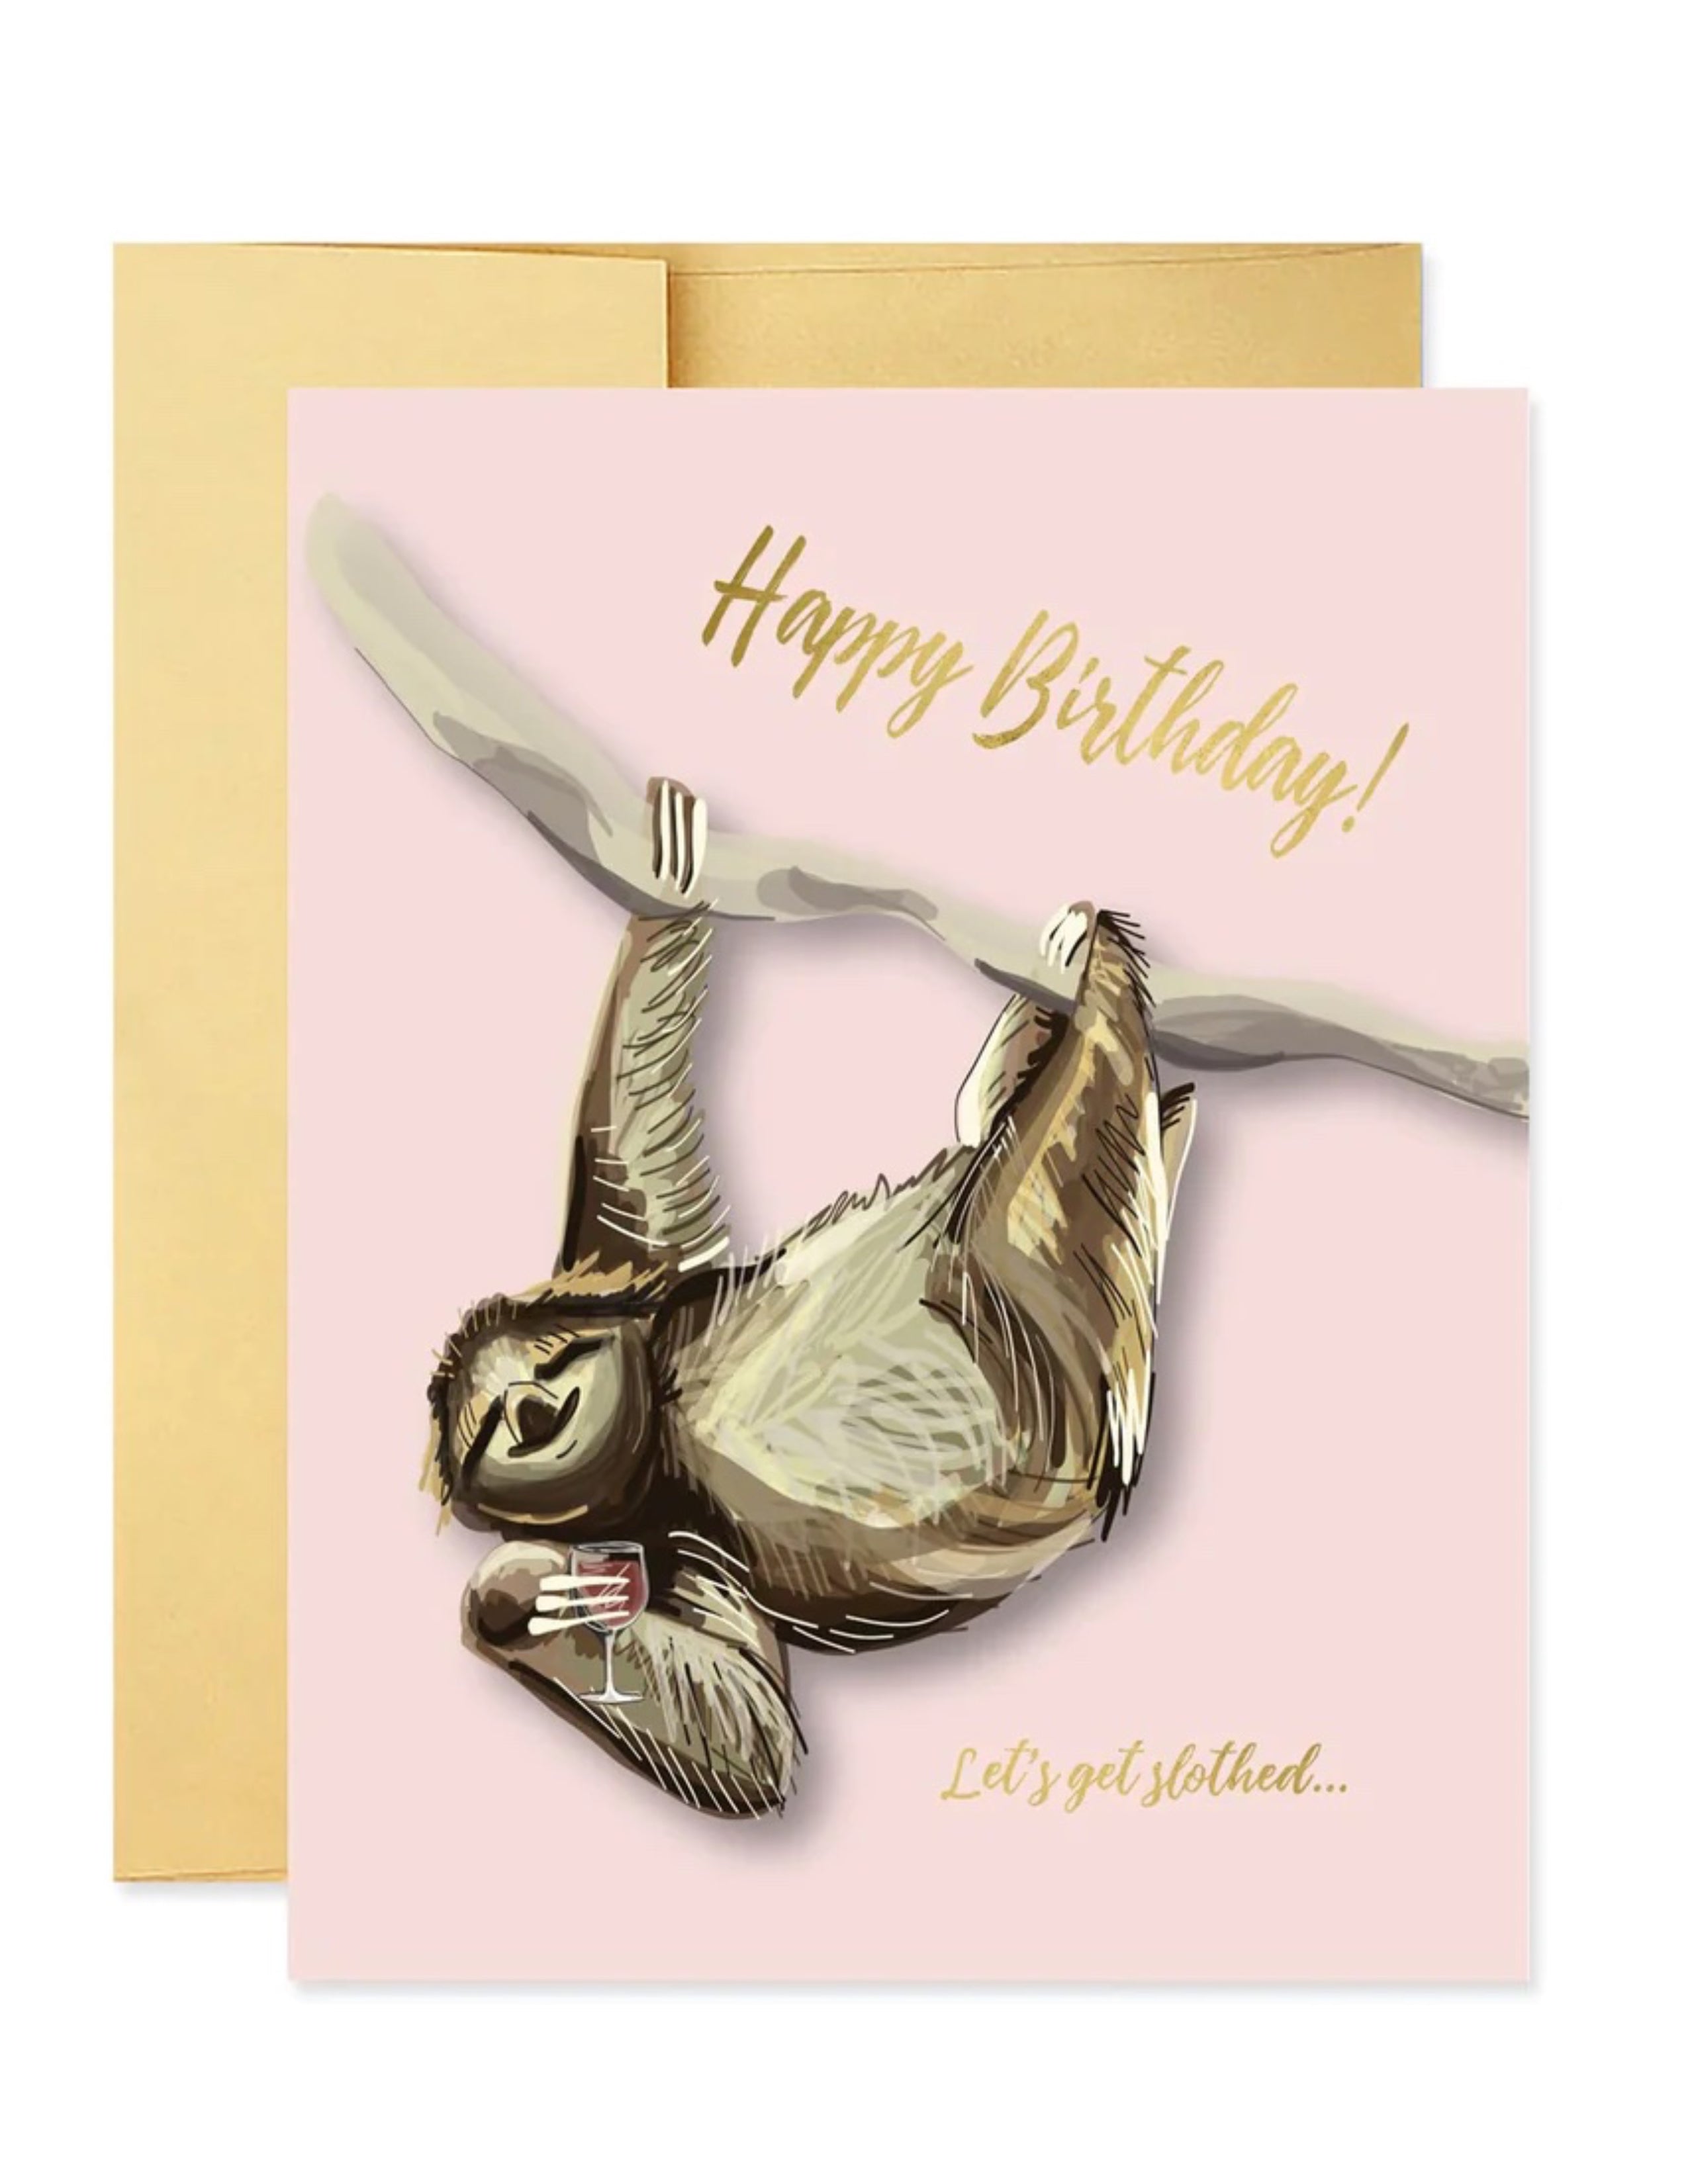 Let's Get Slothed Birthday Card